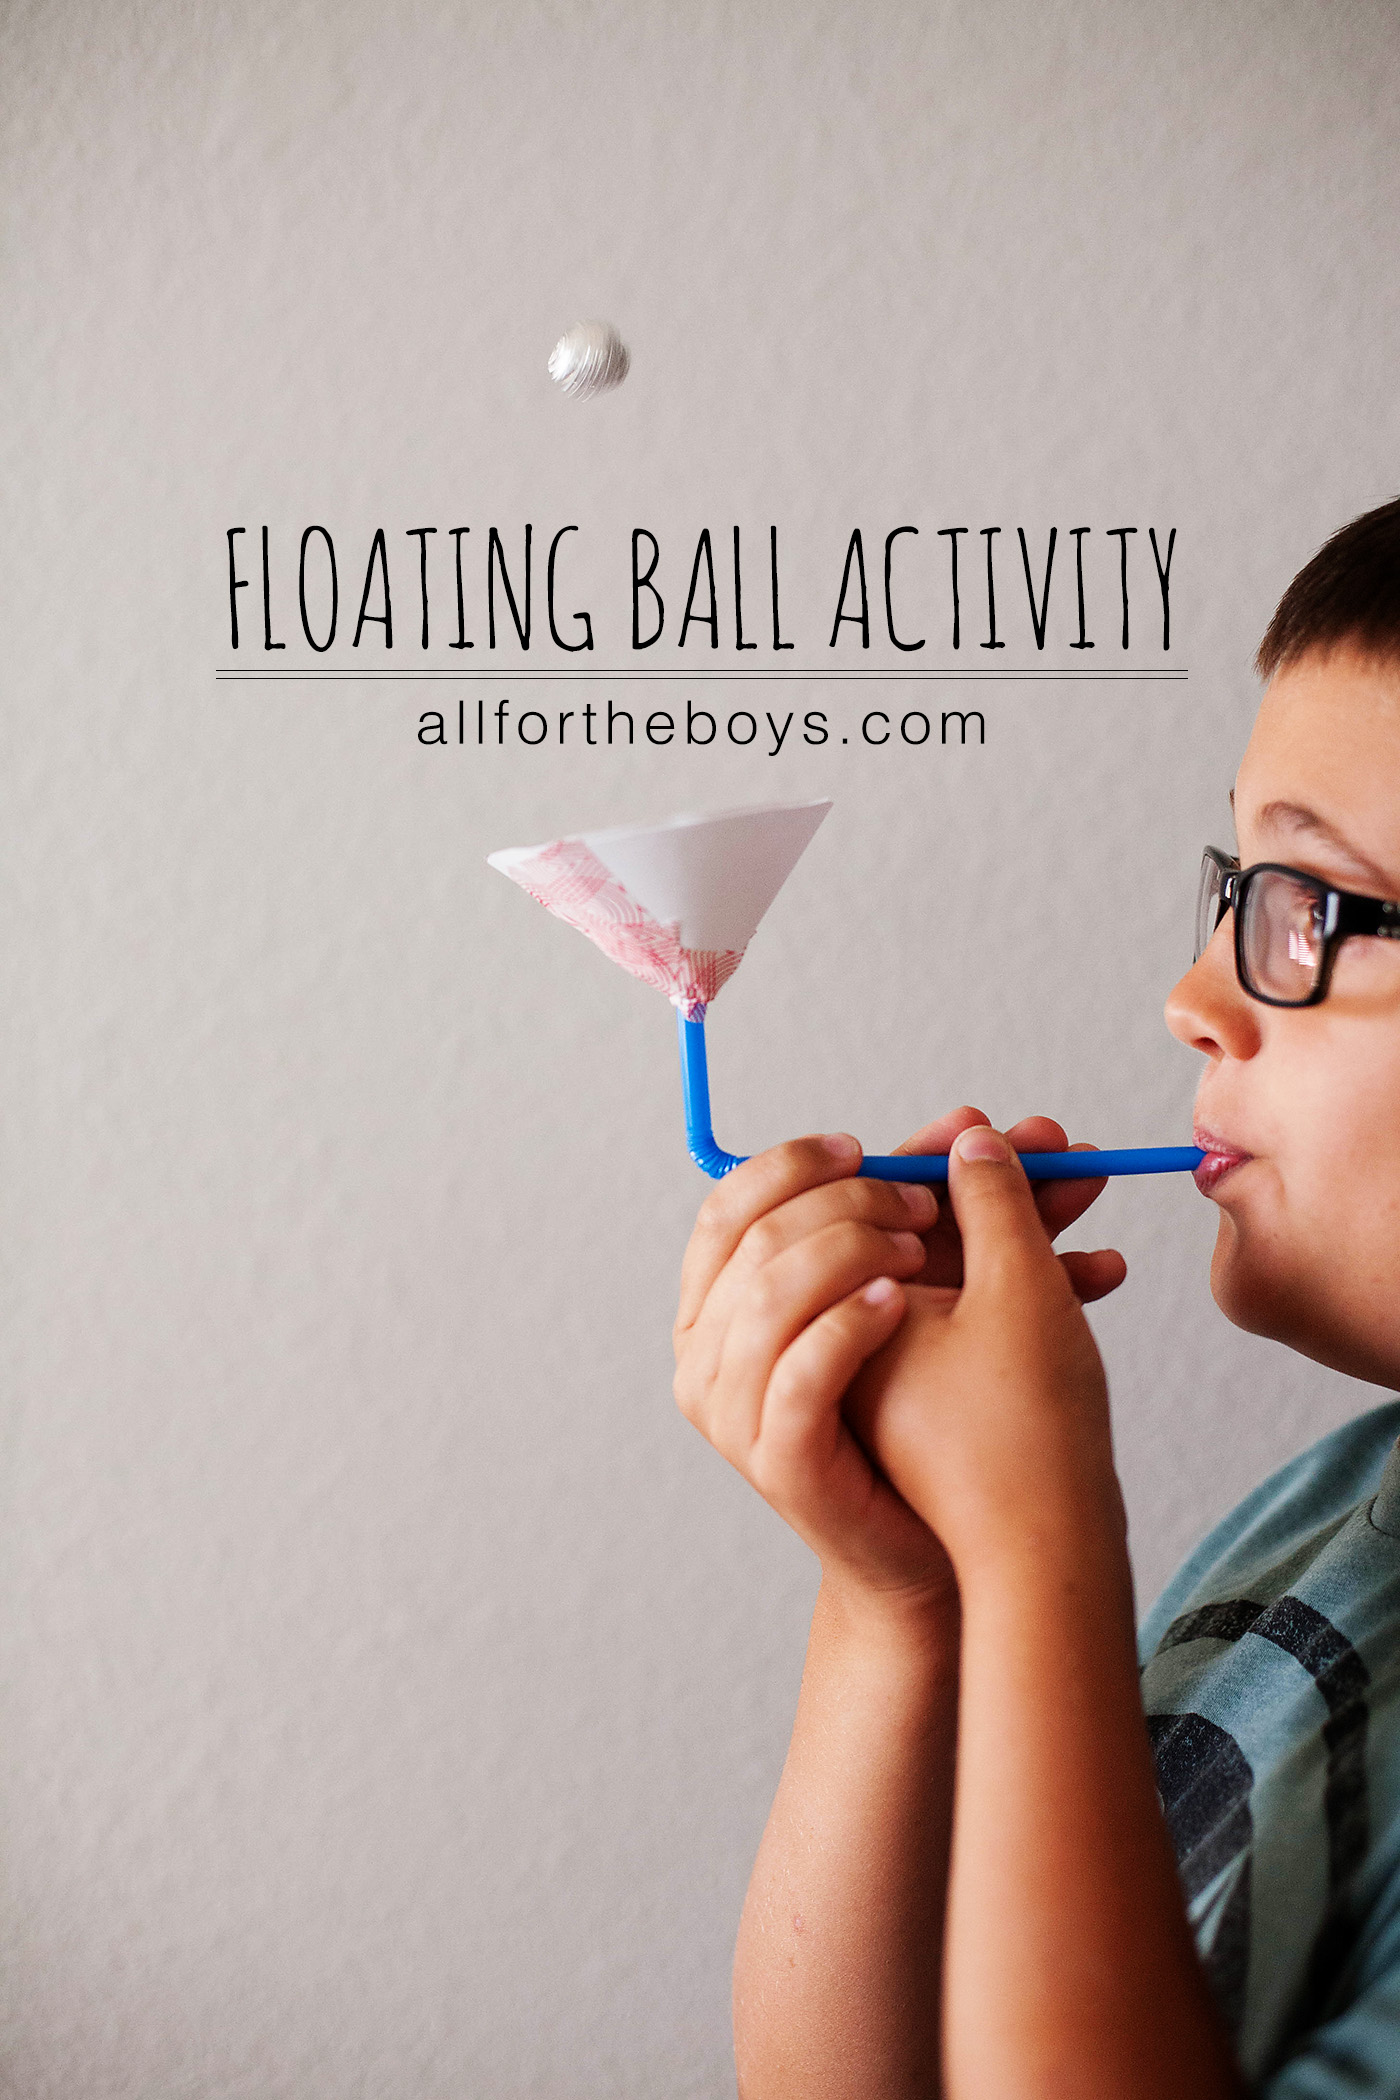 Floating ball activity